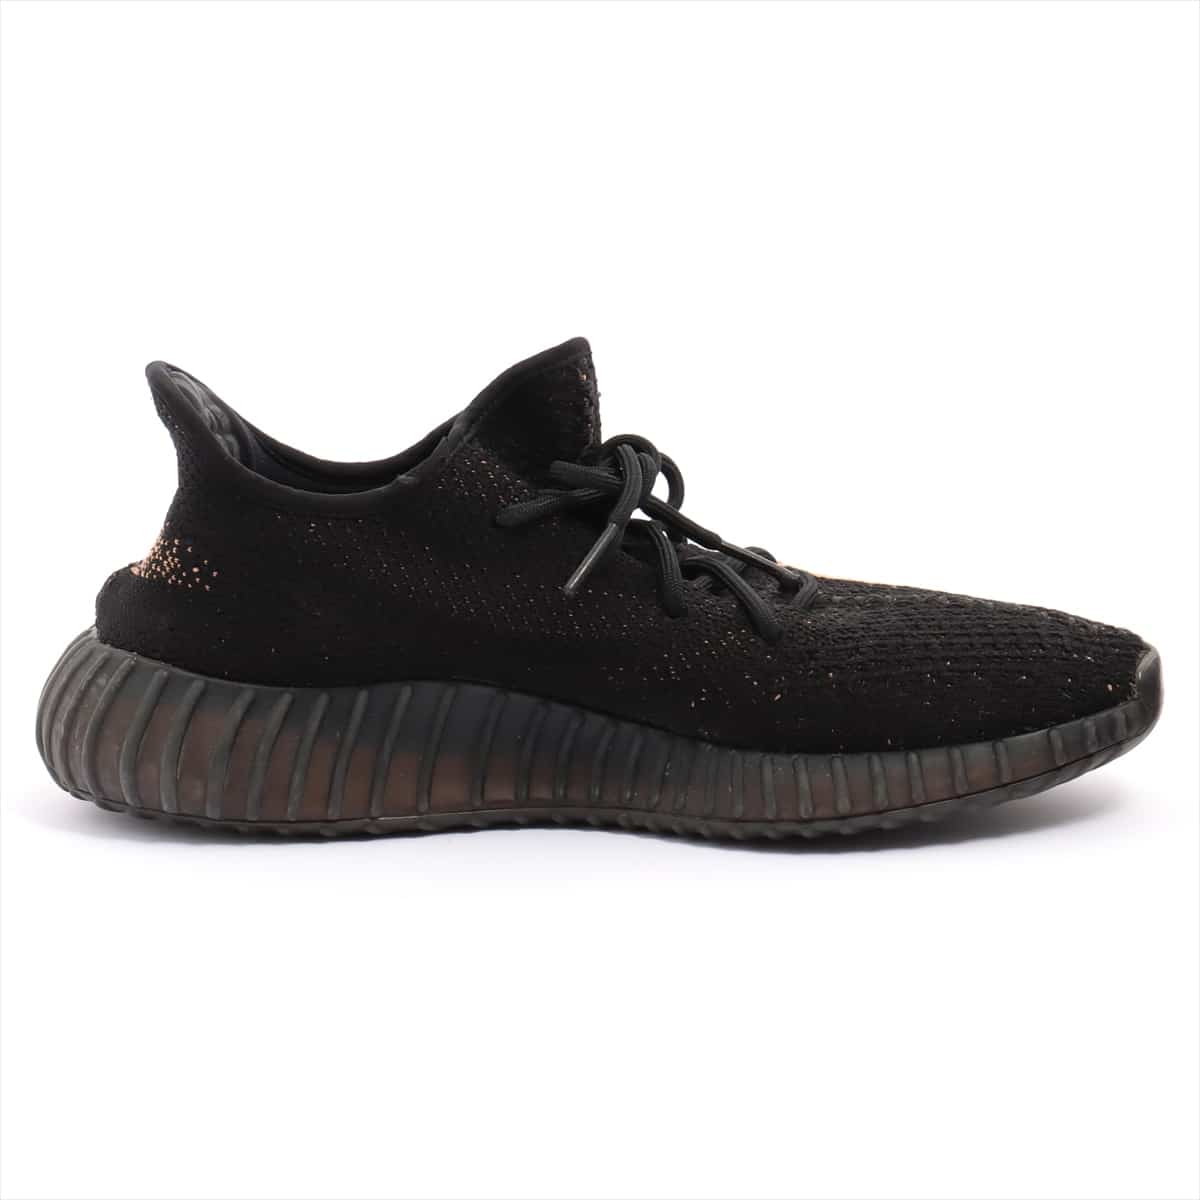 Adidas YEEZY BOOST 350 V2 Knit Sneakers 29.5㎝ Men's Black COPPER BY1605